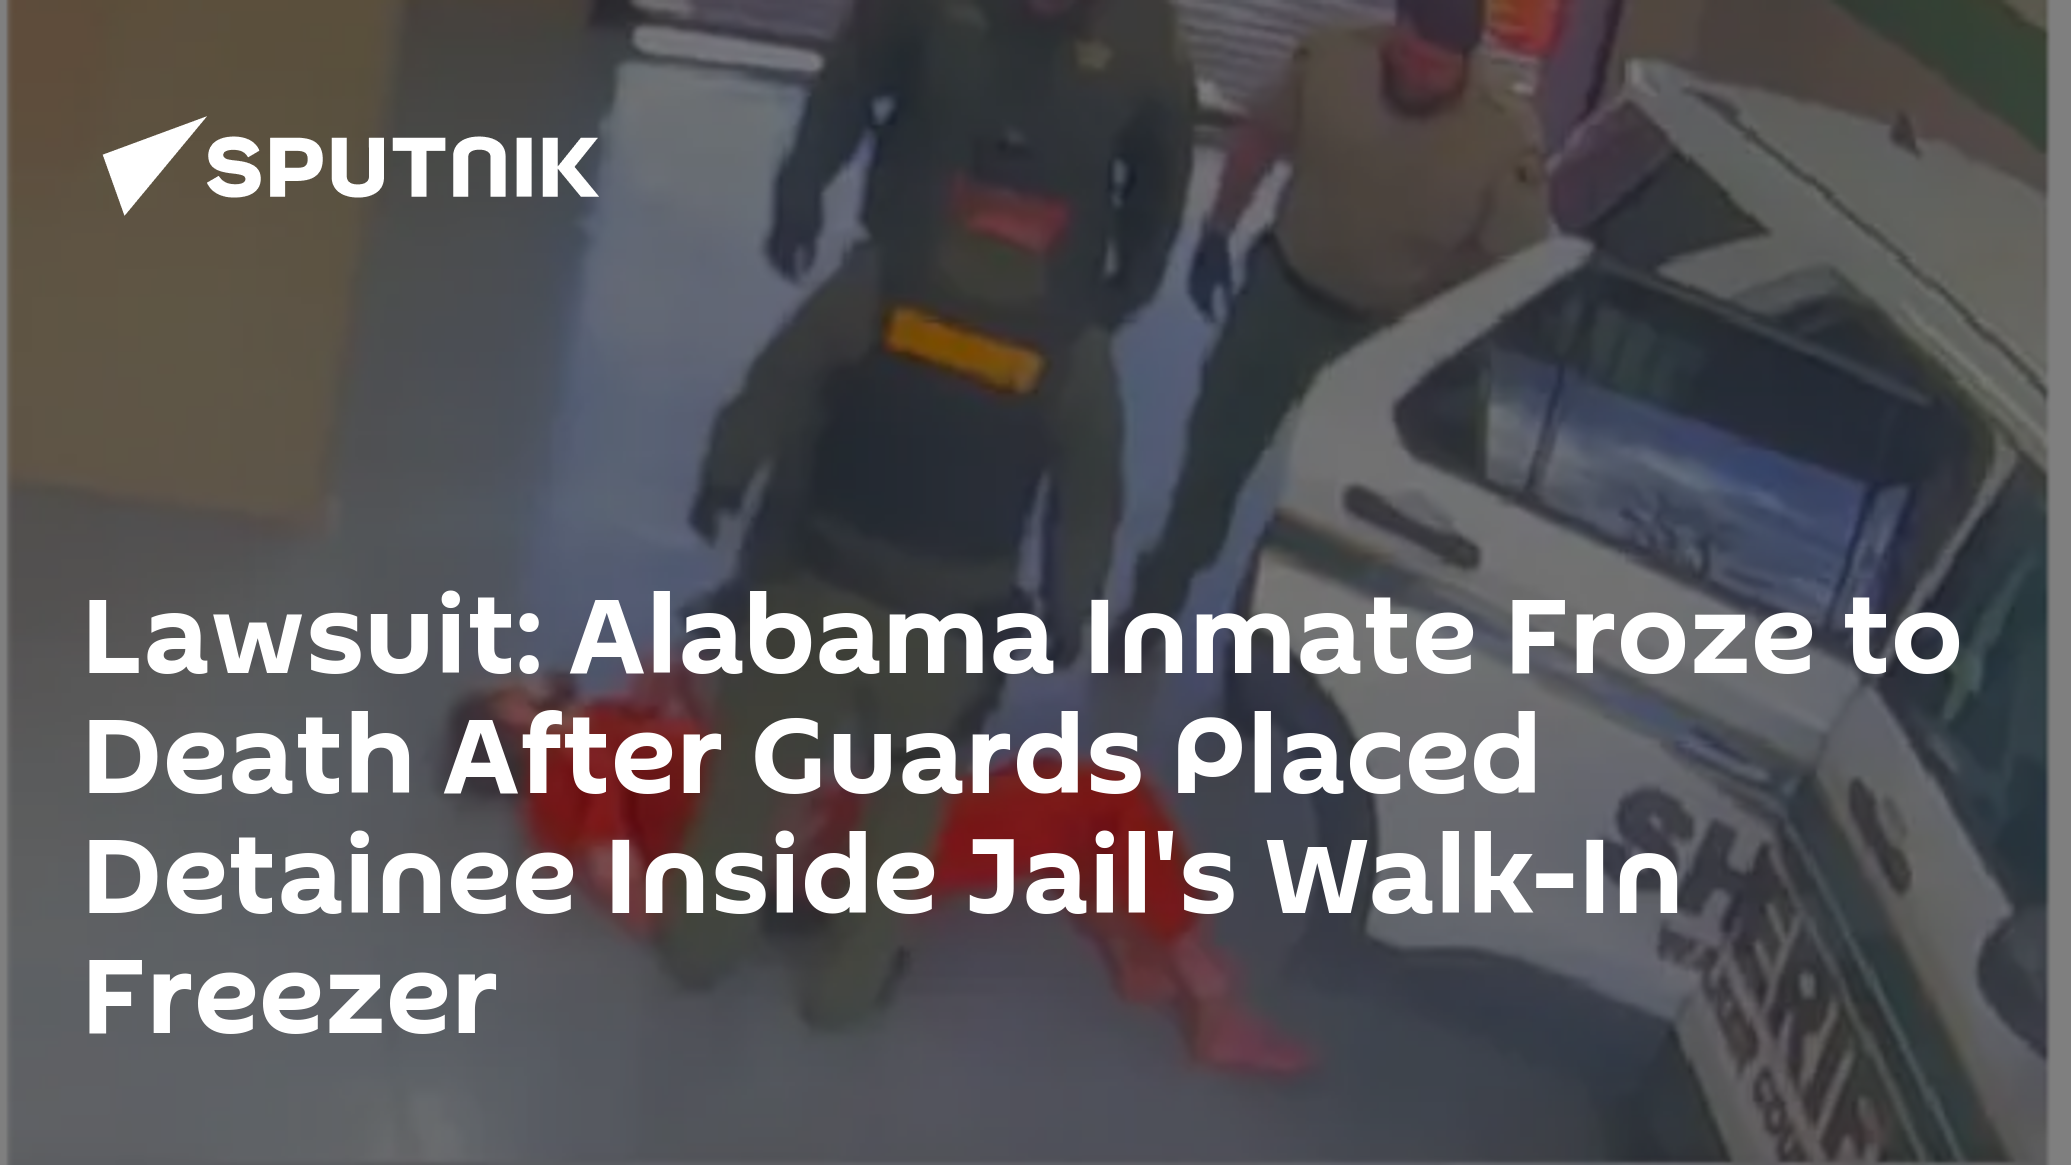 lawsuit:-alabama-inmate-froze-to-death-after-guards-placed-detainee-inside-jail